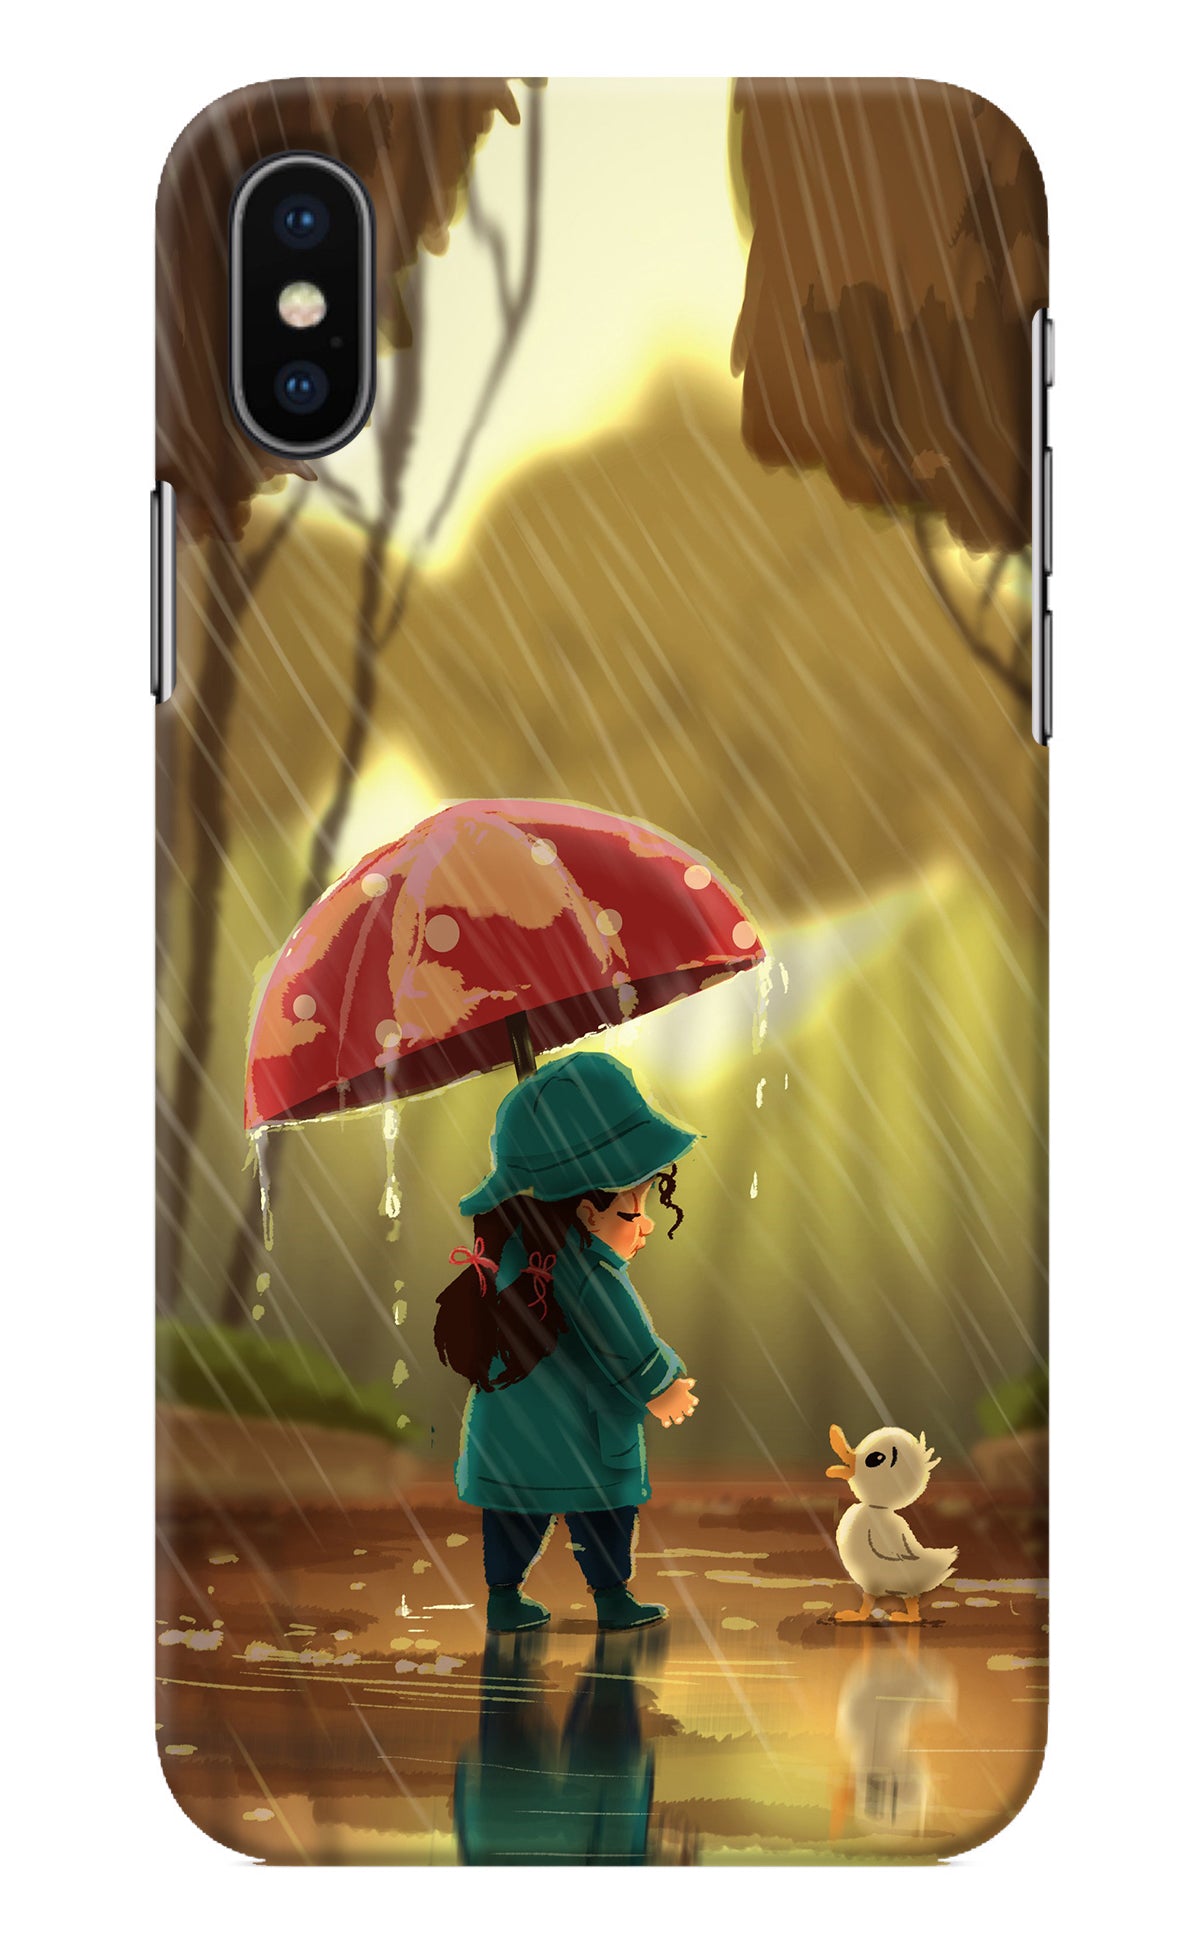 Rainy Day iPhone X Back Cover